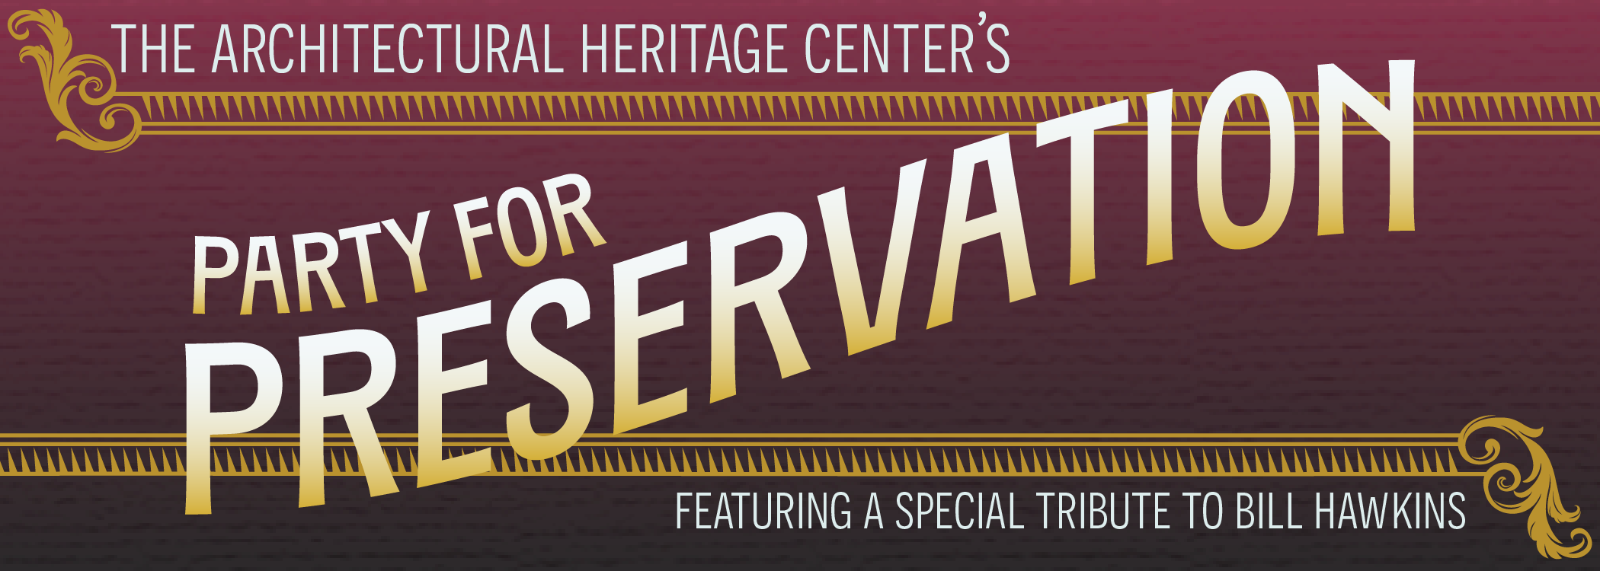 Maroon graphic, featuring the text: "The Architectural Heritage Center's Party for Preservation, Featuring a Special Tribute to Bill Hawkins"